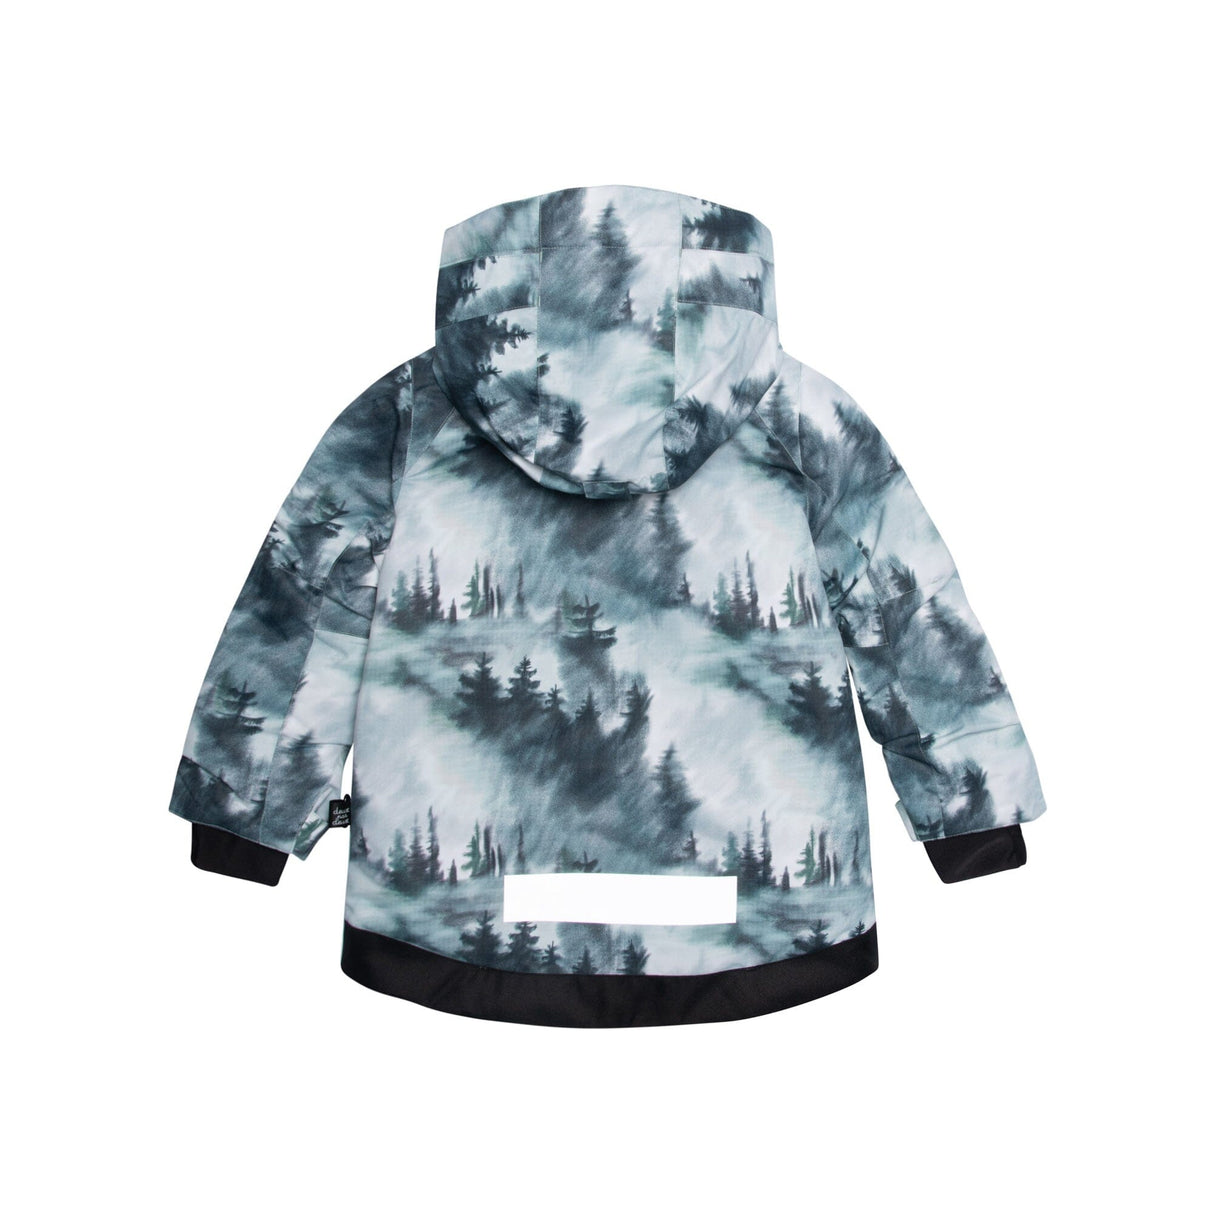 Two Piece Snowsuit Black With Forest Print-4